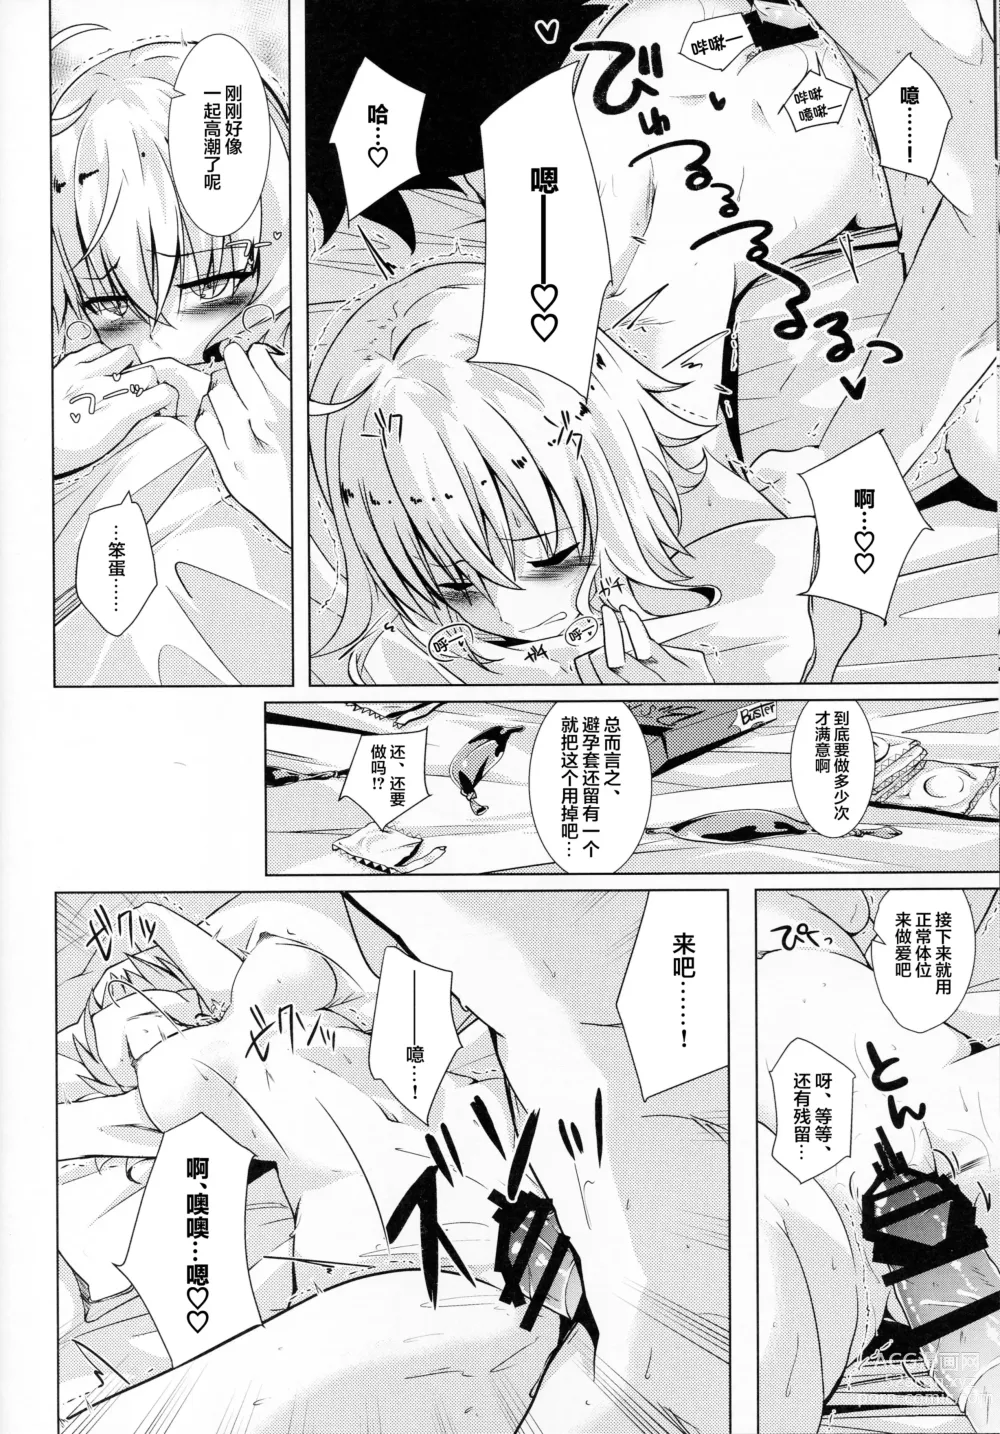 Page 11 of doujinshi Alter酱和爱之灵药和自我束缚卷轴